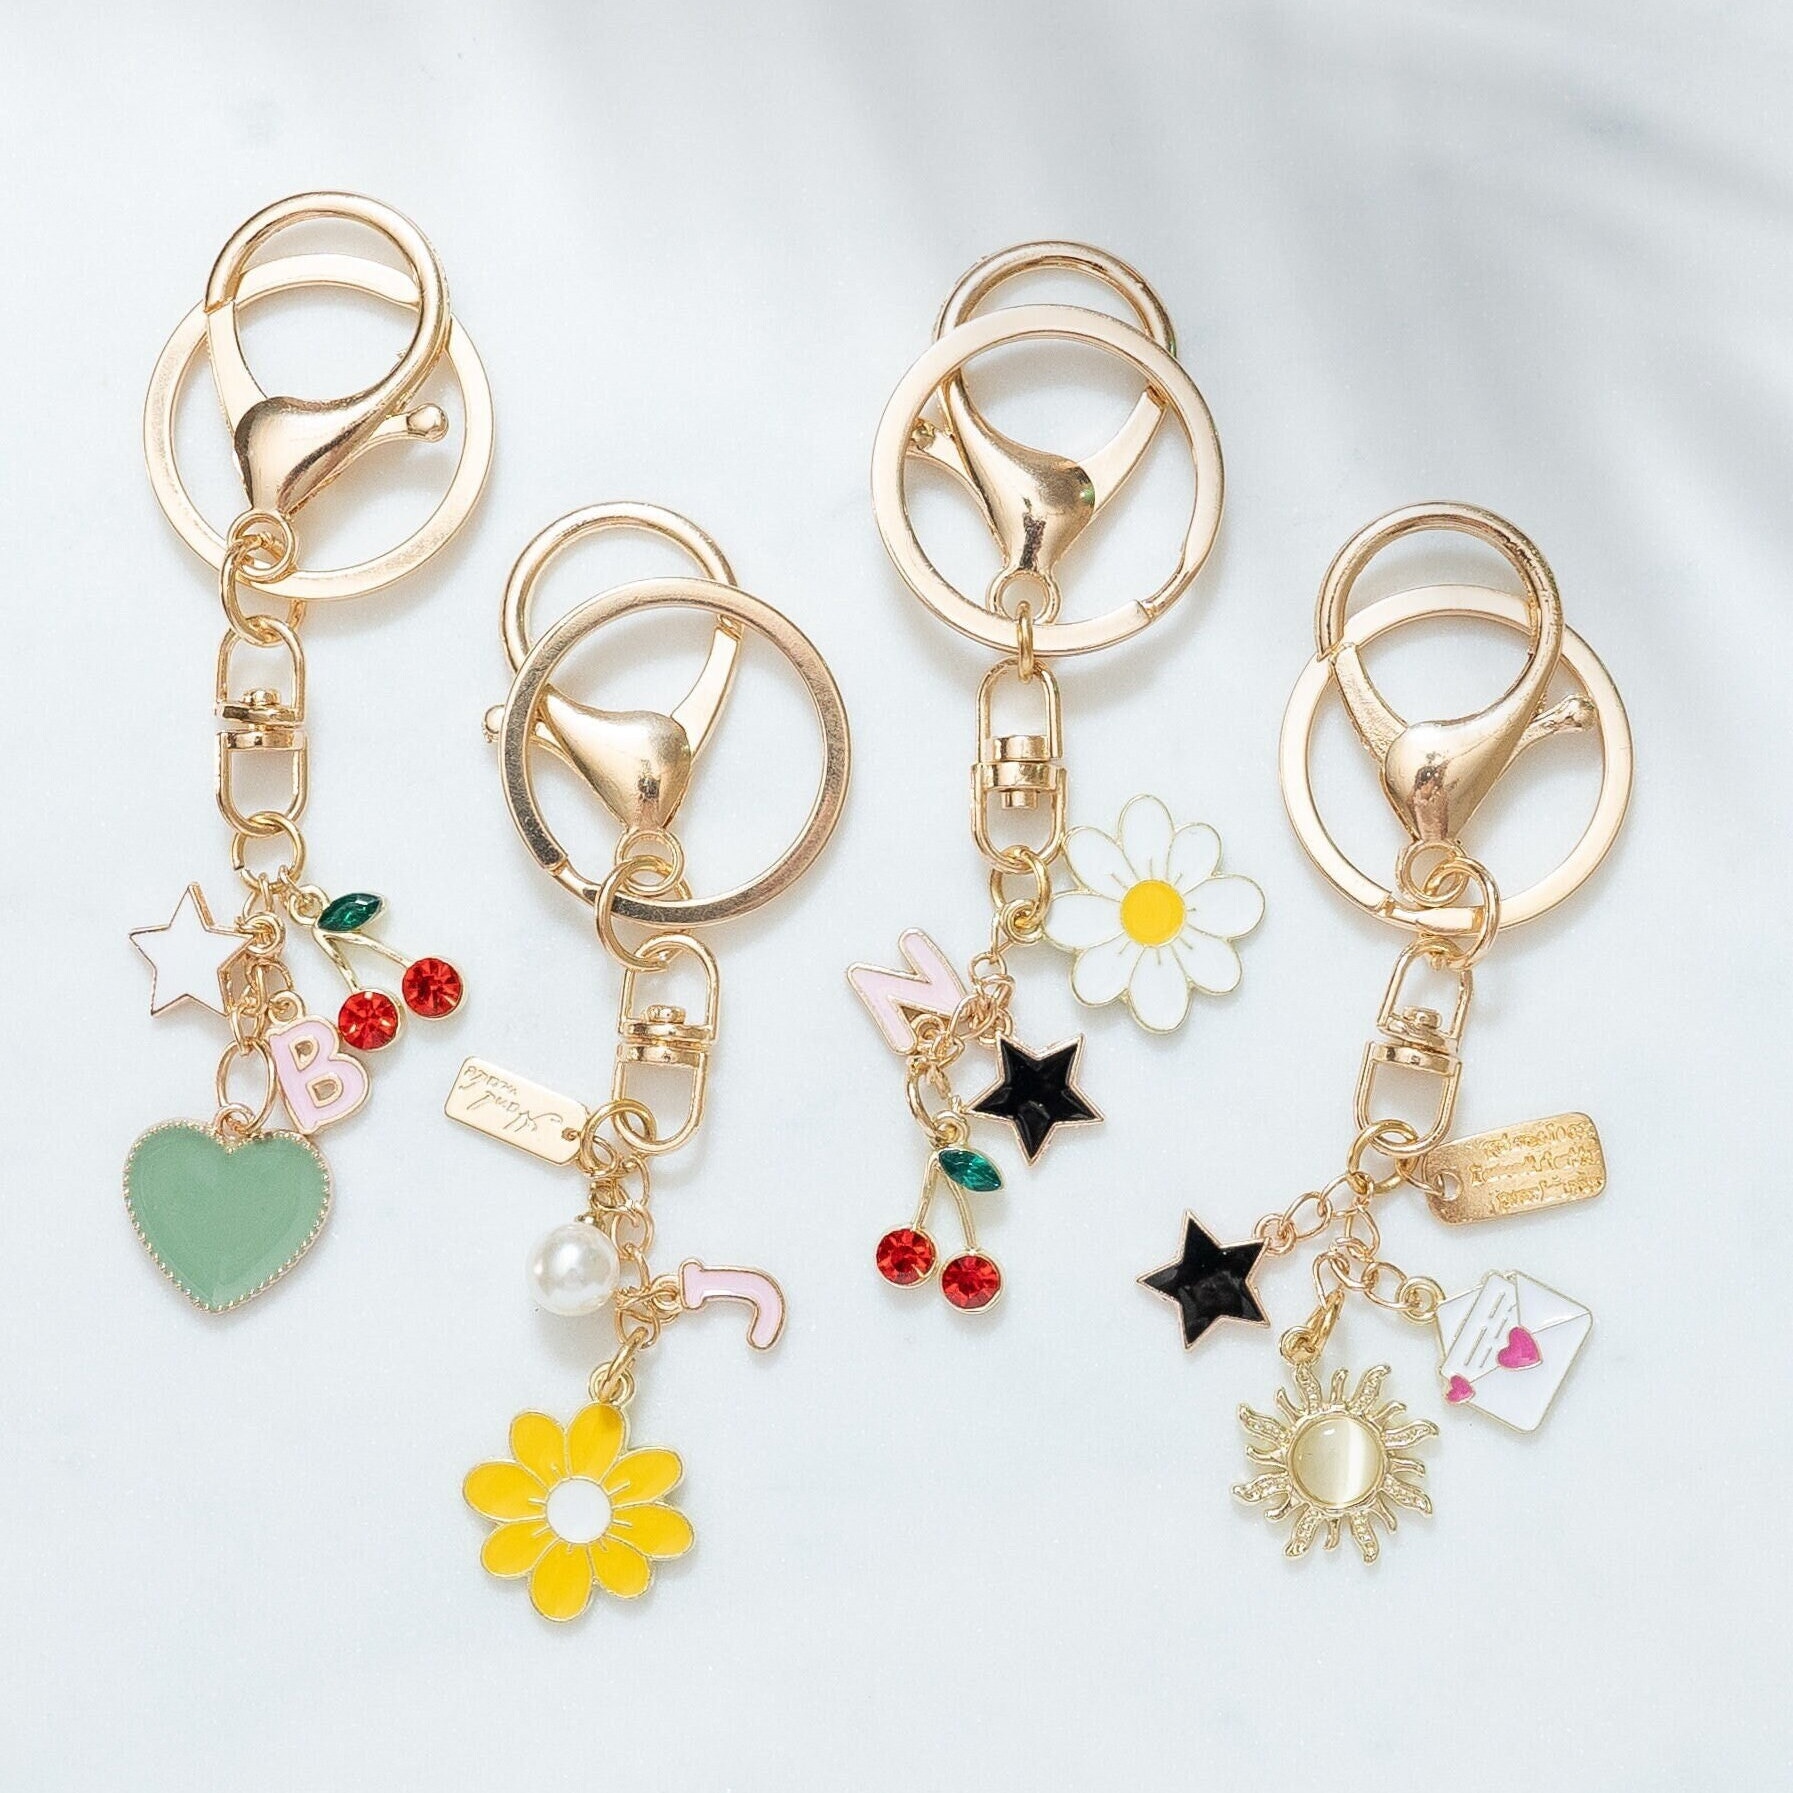 Blooming Flowers Chain Bag Charm S00 - Women - Accessories